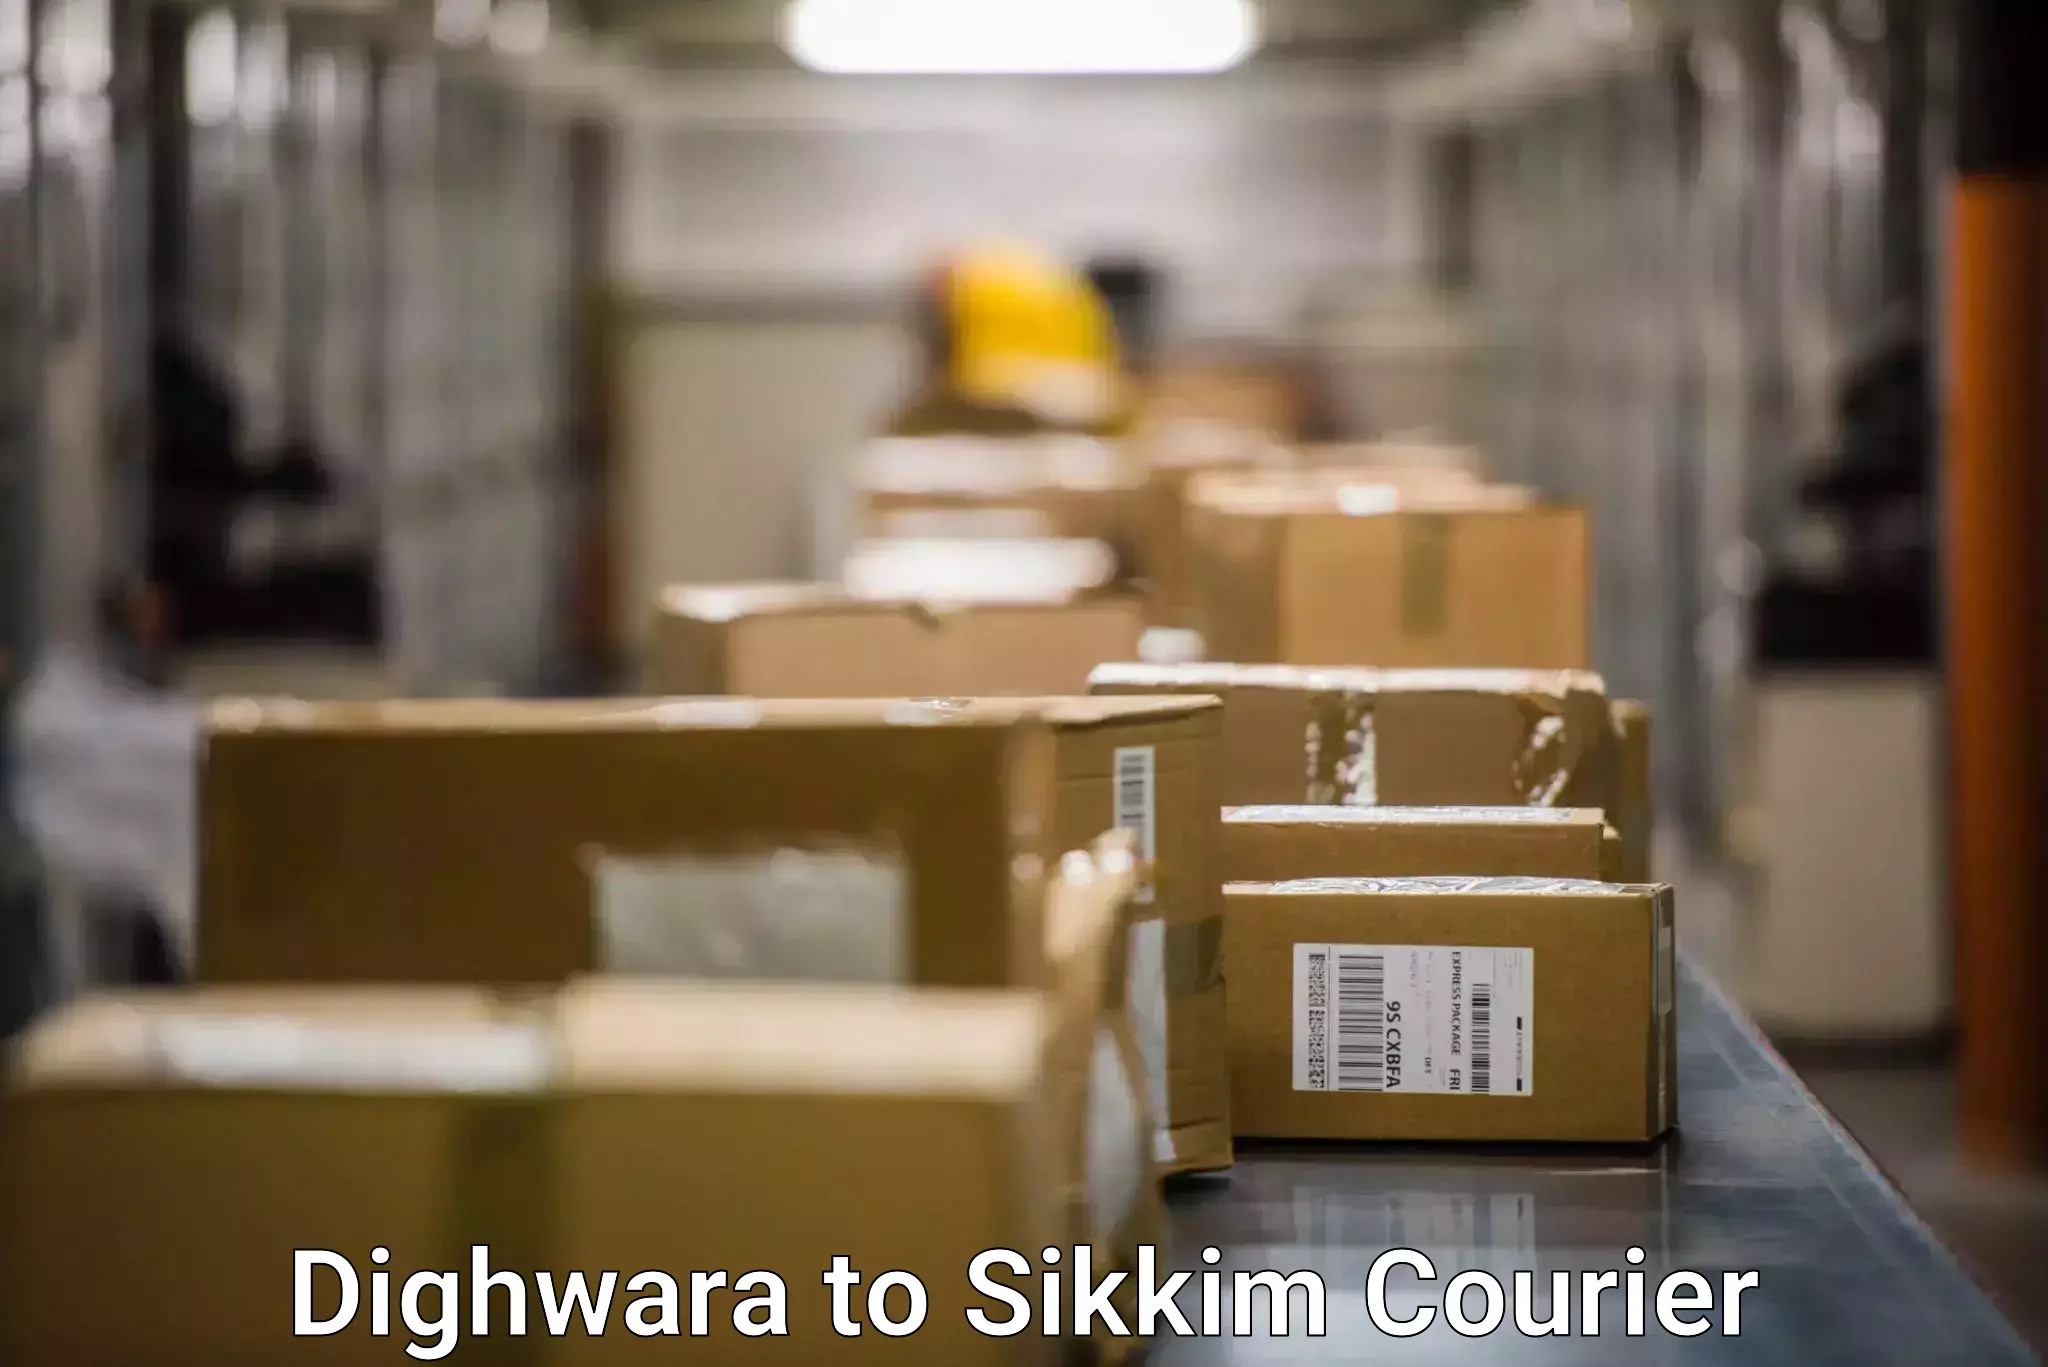 Cargo delivery service Dighwara to Sikkim